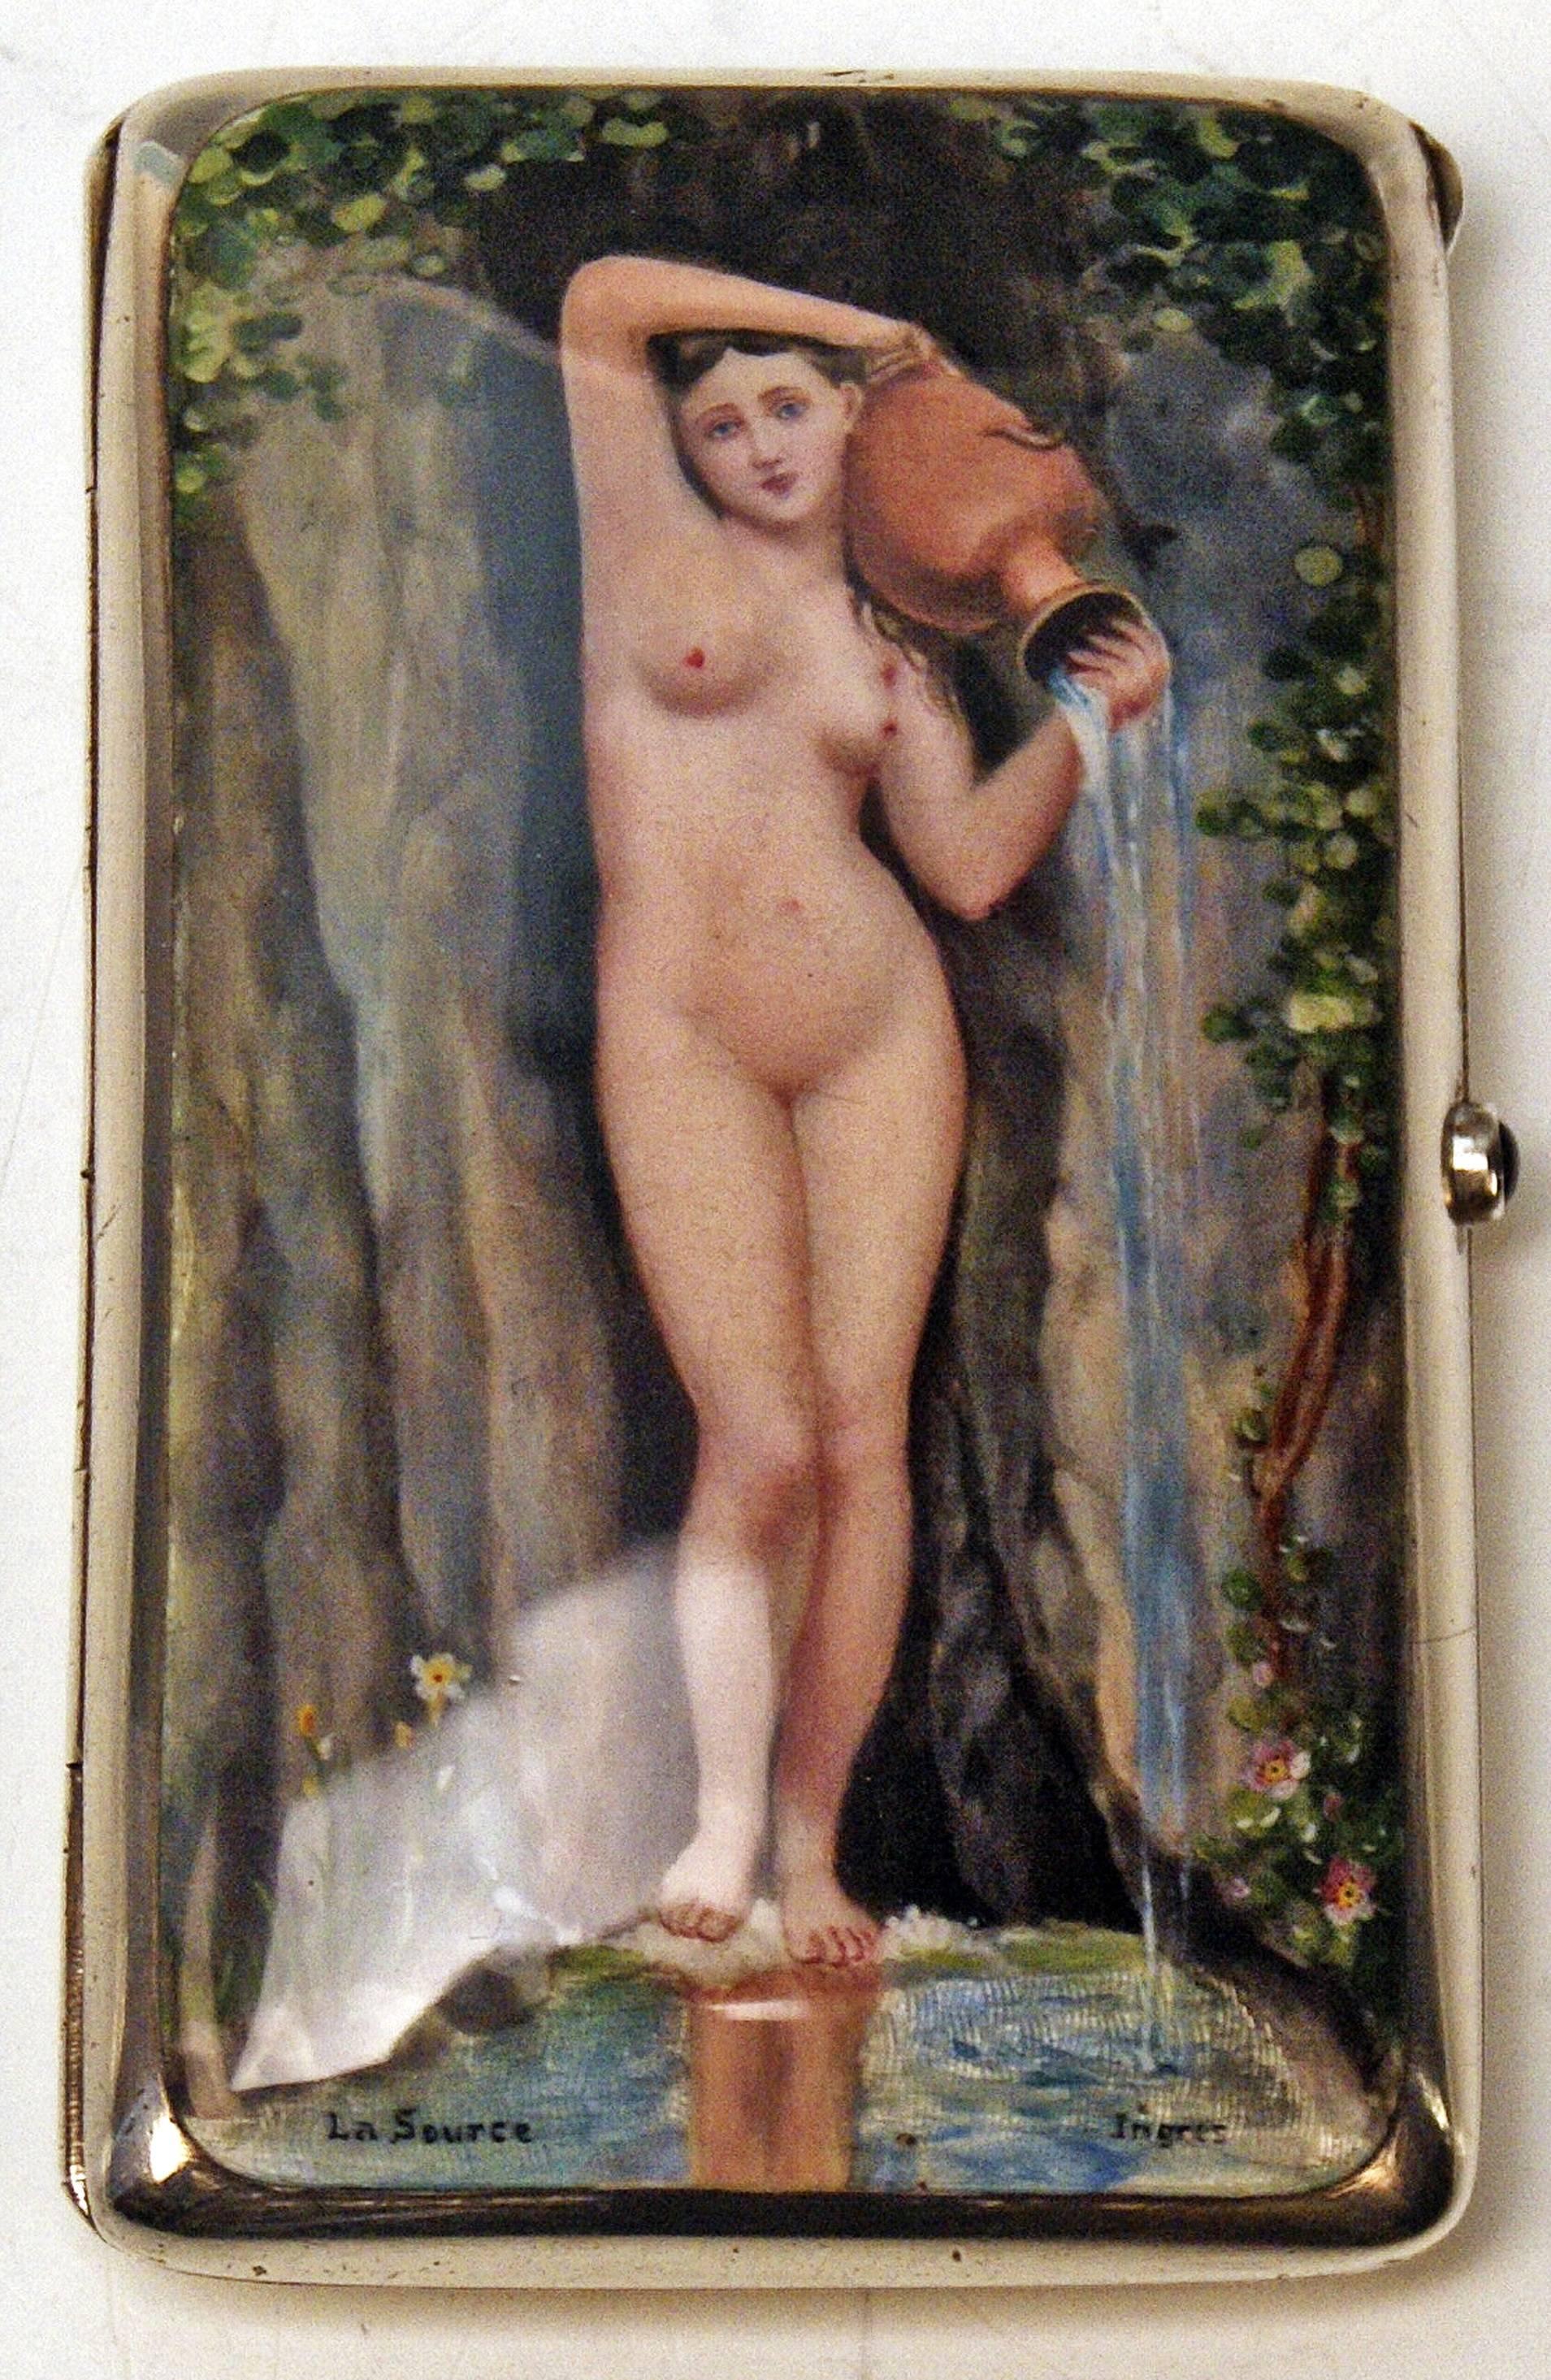 Gorgeous sterling silver cigarette box / case with enamel painting covering lid: female nude called 'the source', once created by the famous french neoclassical painter Jean Auguste Dominique Ingres (1780-1867).

The lid is decorated with stunning